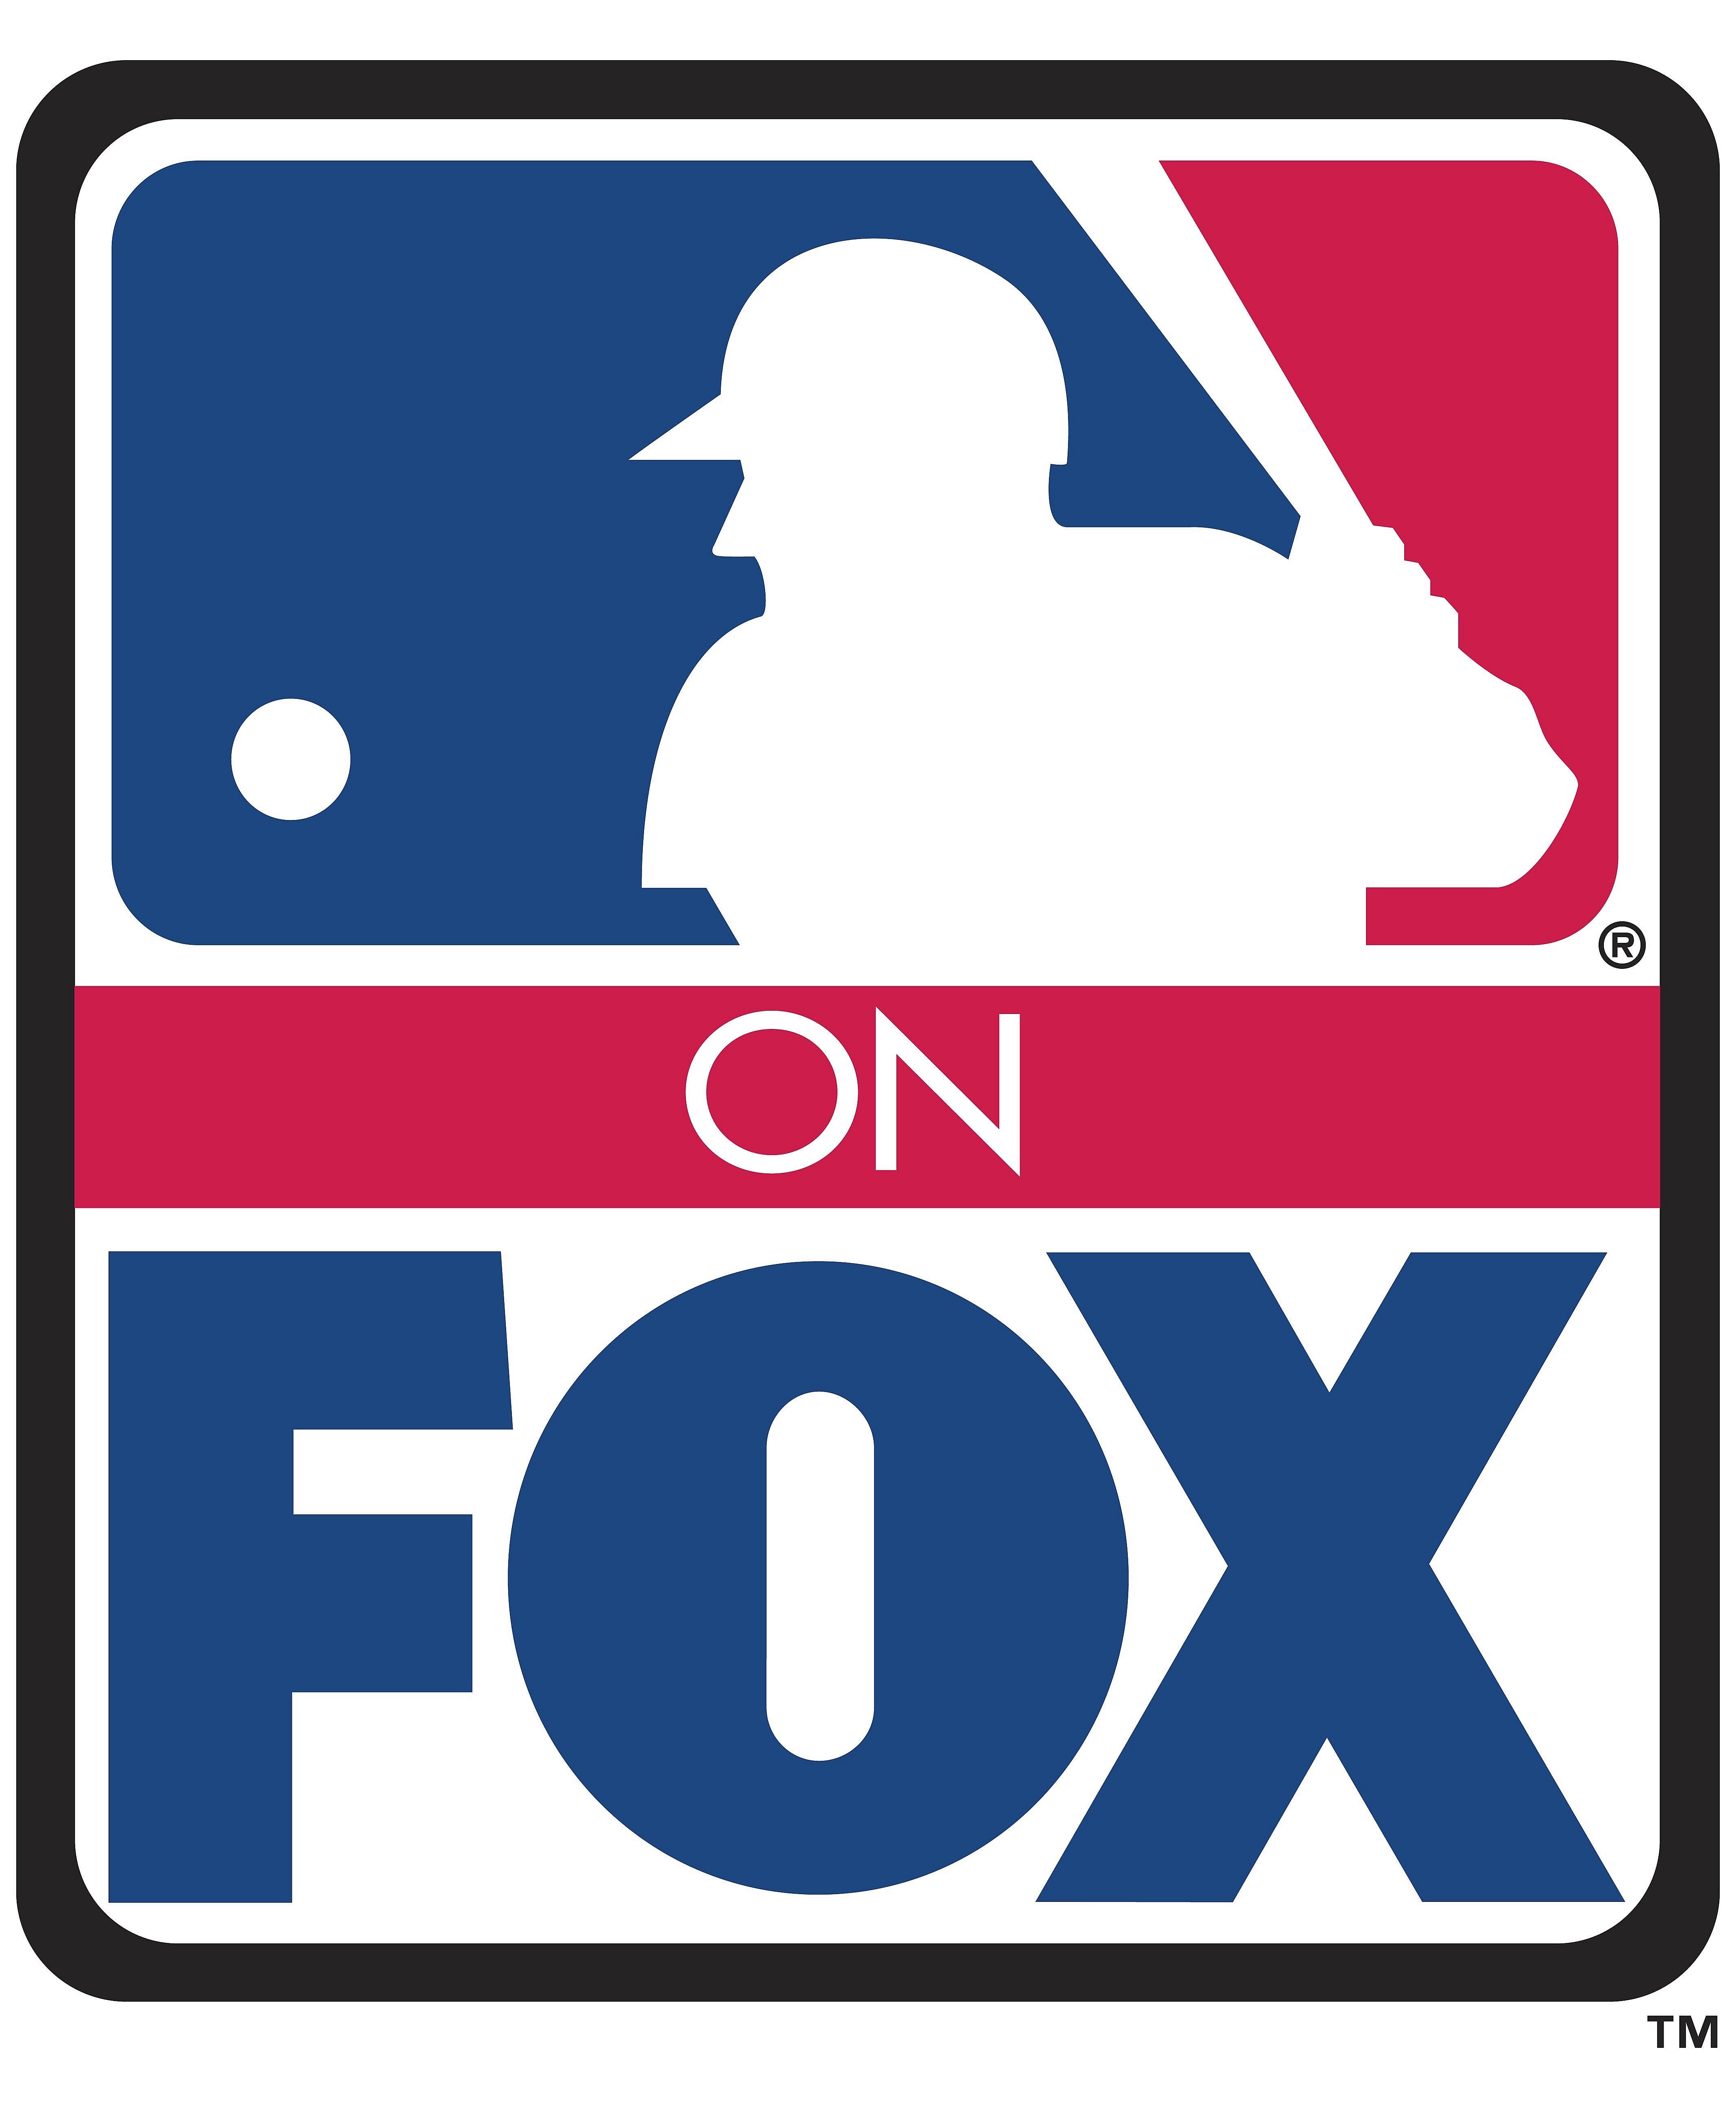 It’s the 2015 MLB on Fox/Fox Sports 1 Schedule | Fang's Bites4270 x 5185